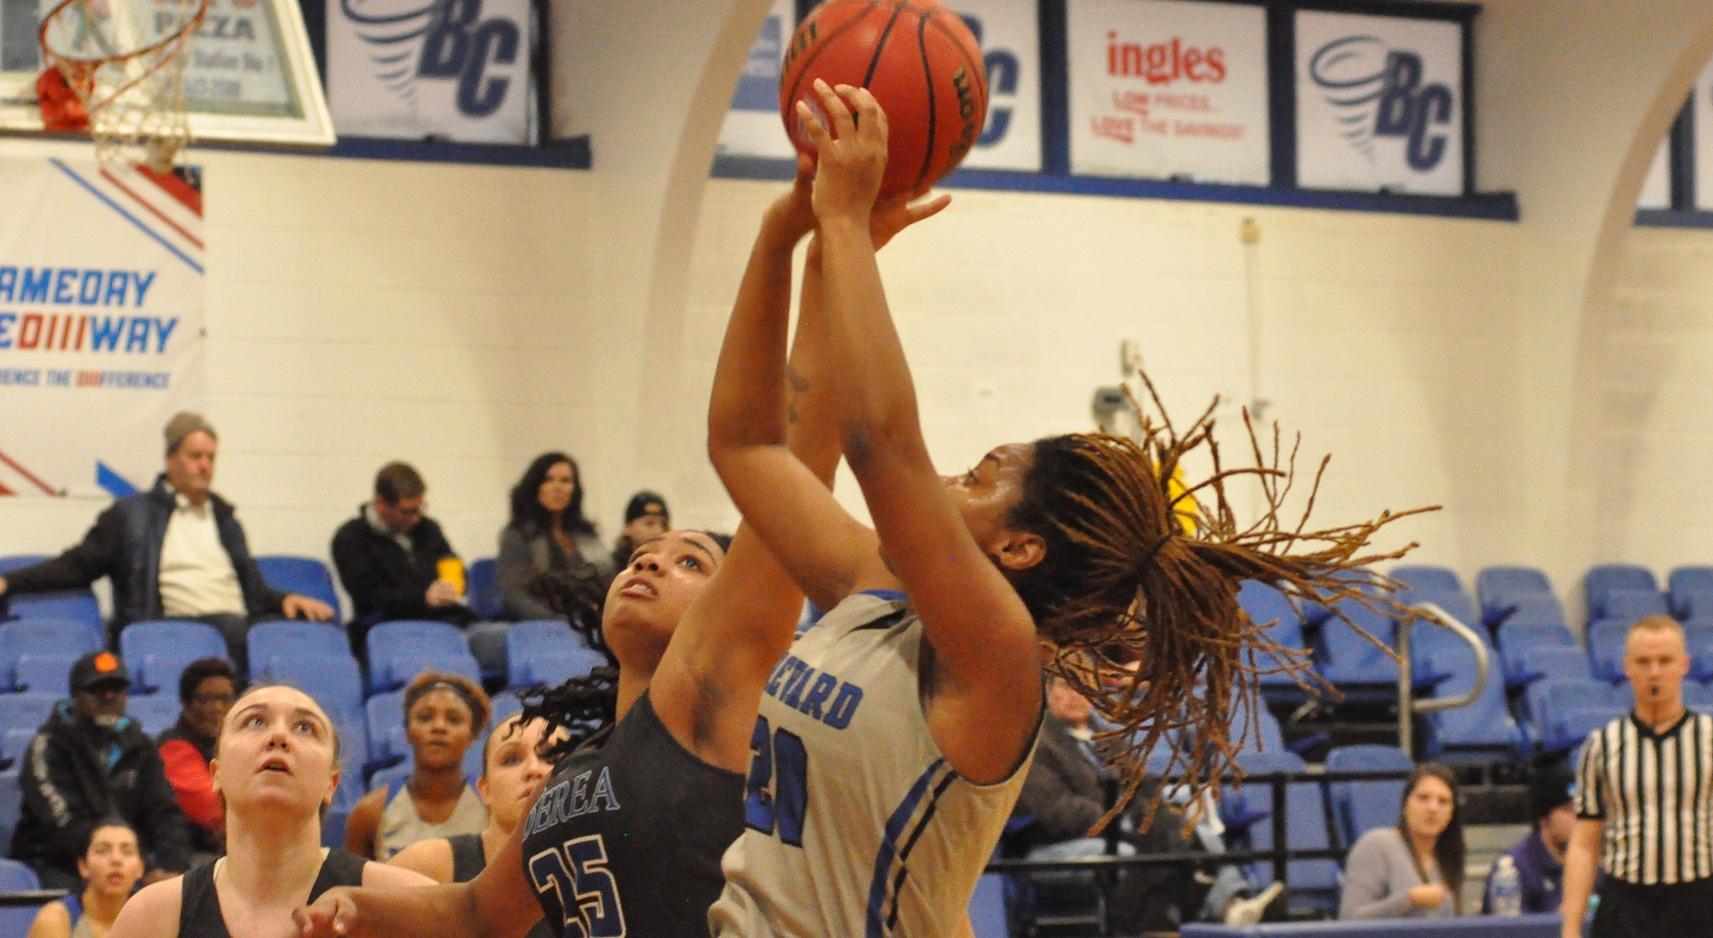 Junior forward Deja Riddick led the way for the Tornados, scoring 15 points and grabbing 10 boards for her third double-double of 2019-20 (Photo courtesy of Tommy Moss).